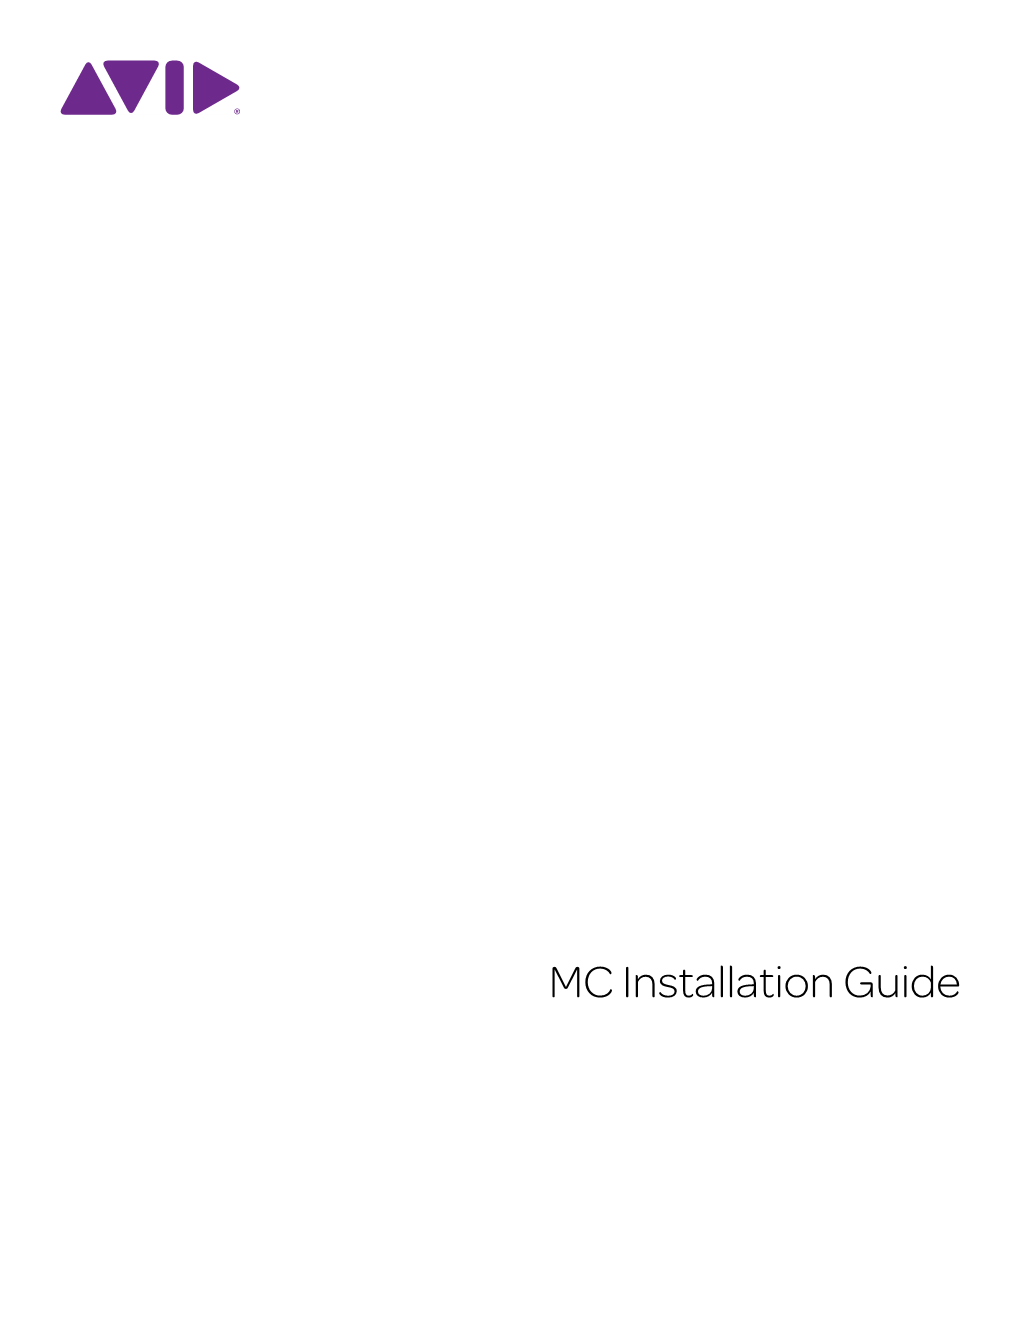 MC Installation Guide Legal Notices This Guide Is Copyrighted ©2011 by Avid Technology, Inc., with All Rights Reserved